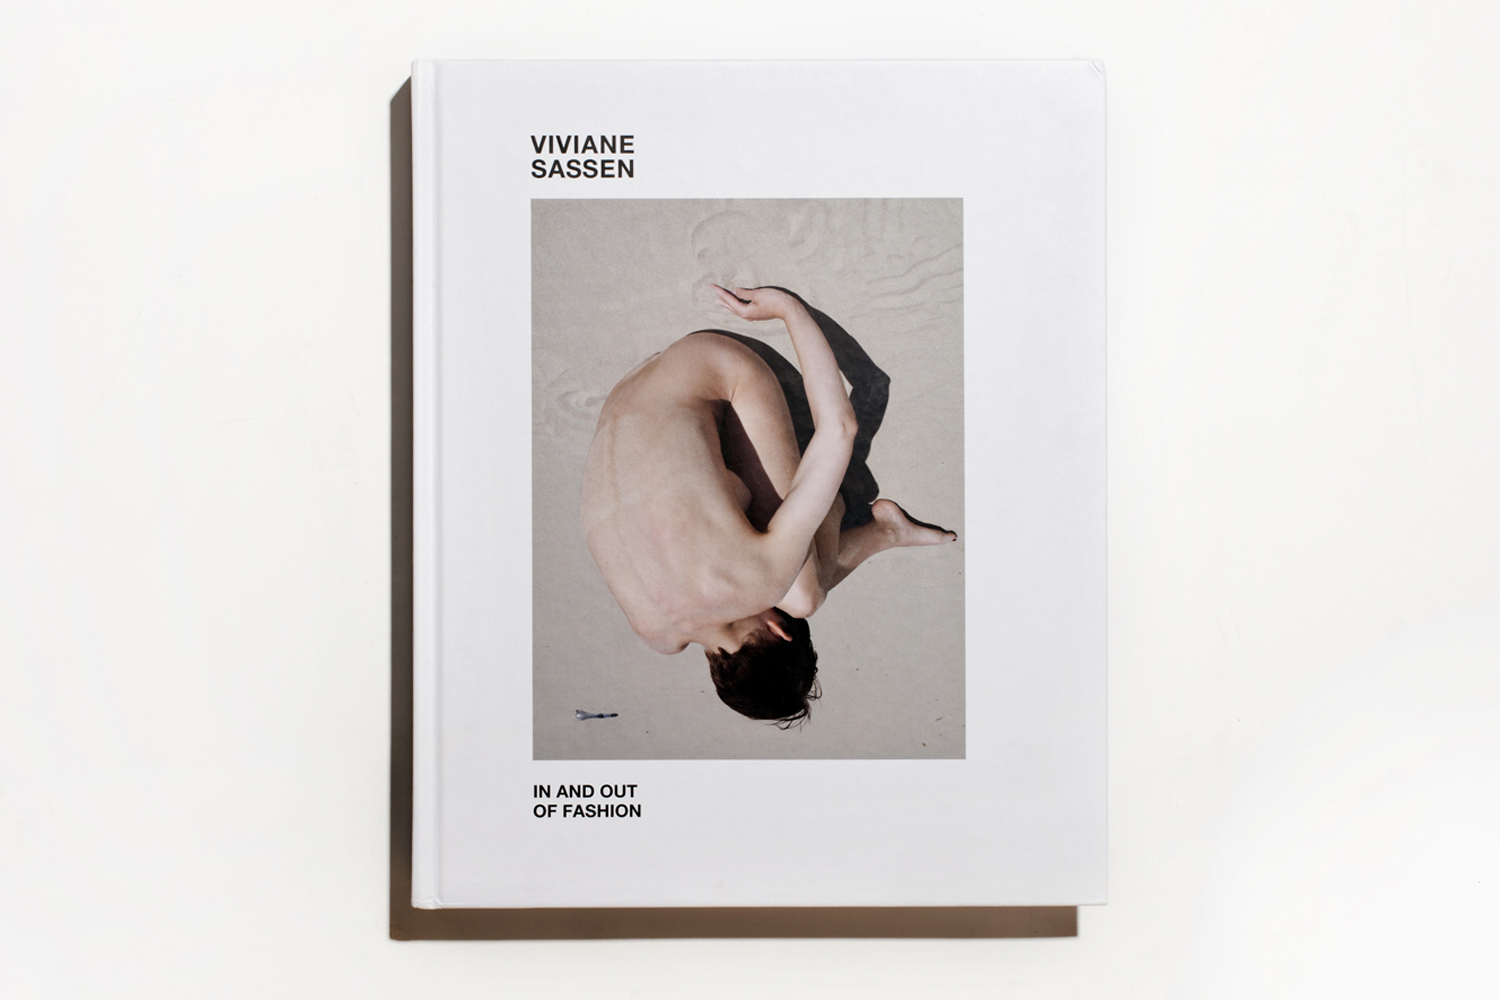 In and Out of Fashion by Viviane Sassen, published by Prestel, selected by Anne Bourgeois-Vignon, creative content director, Nowness.